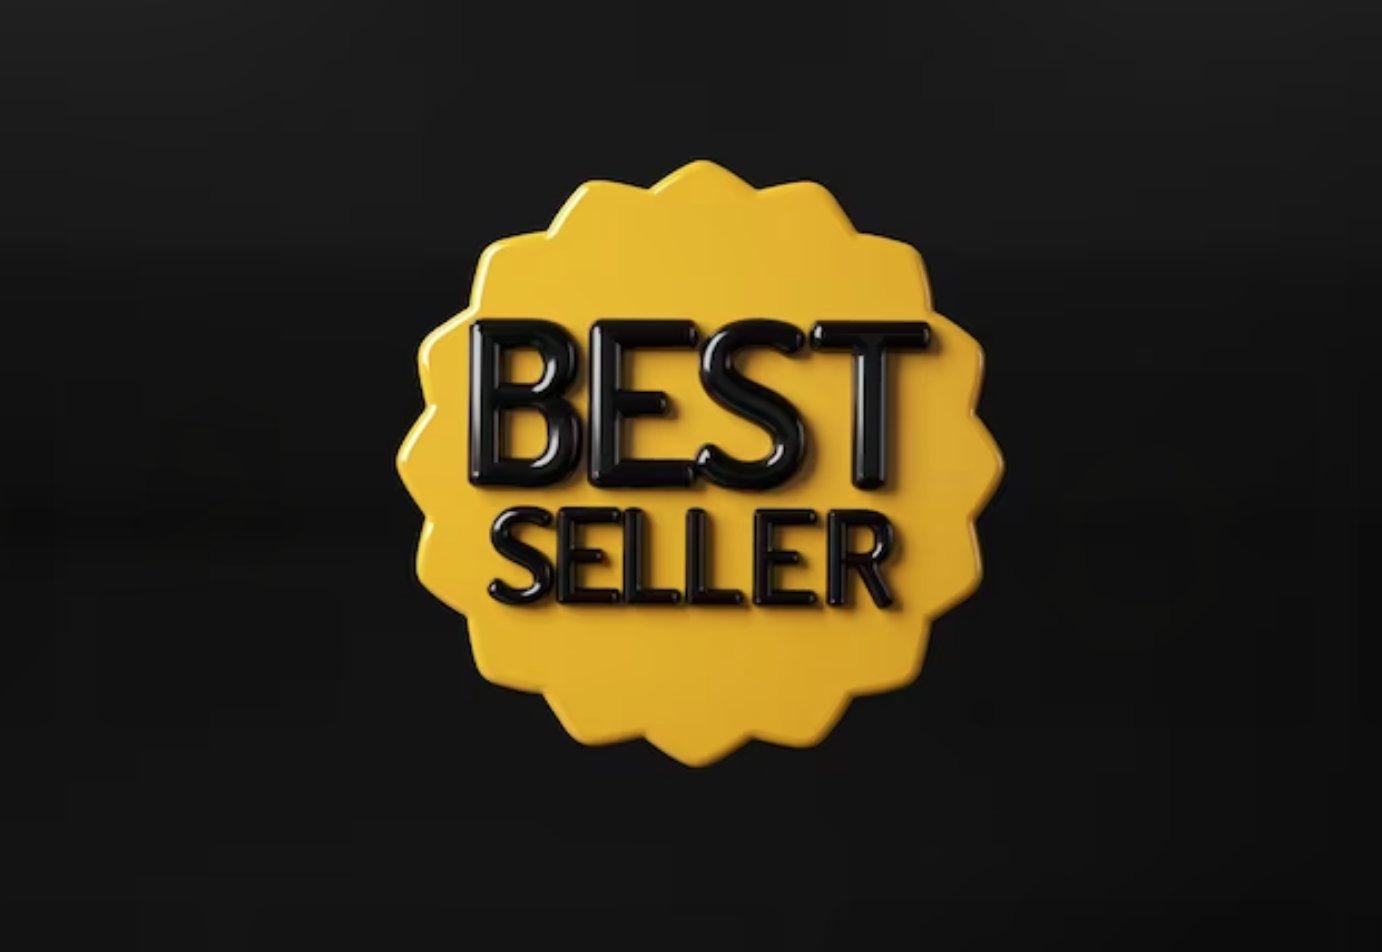 Bestsellers Mobile Cable Store